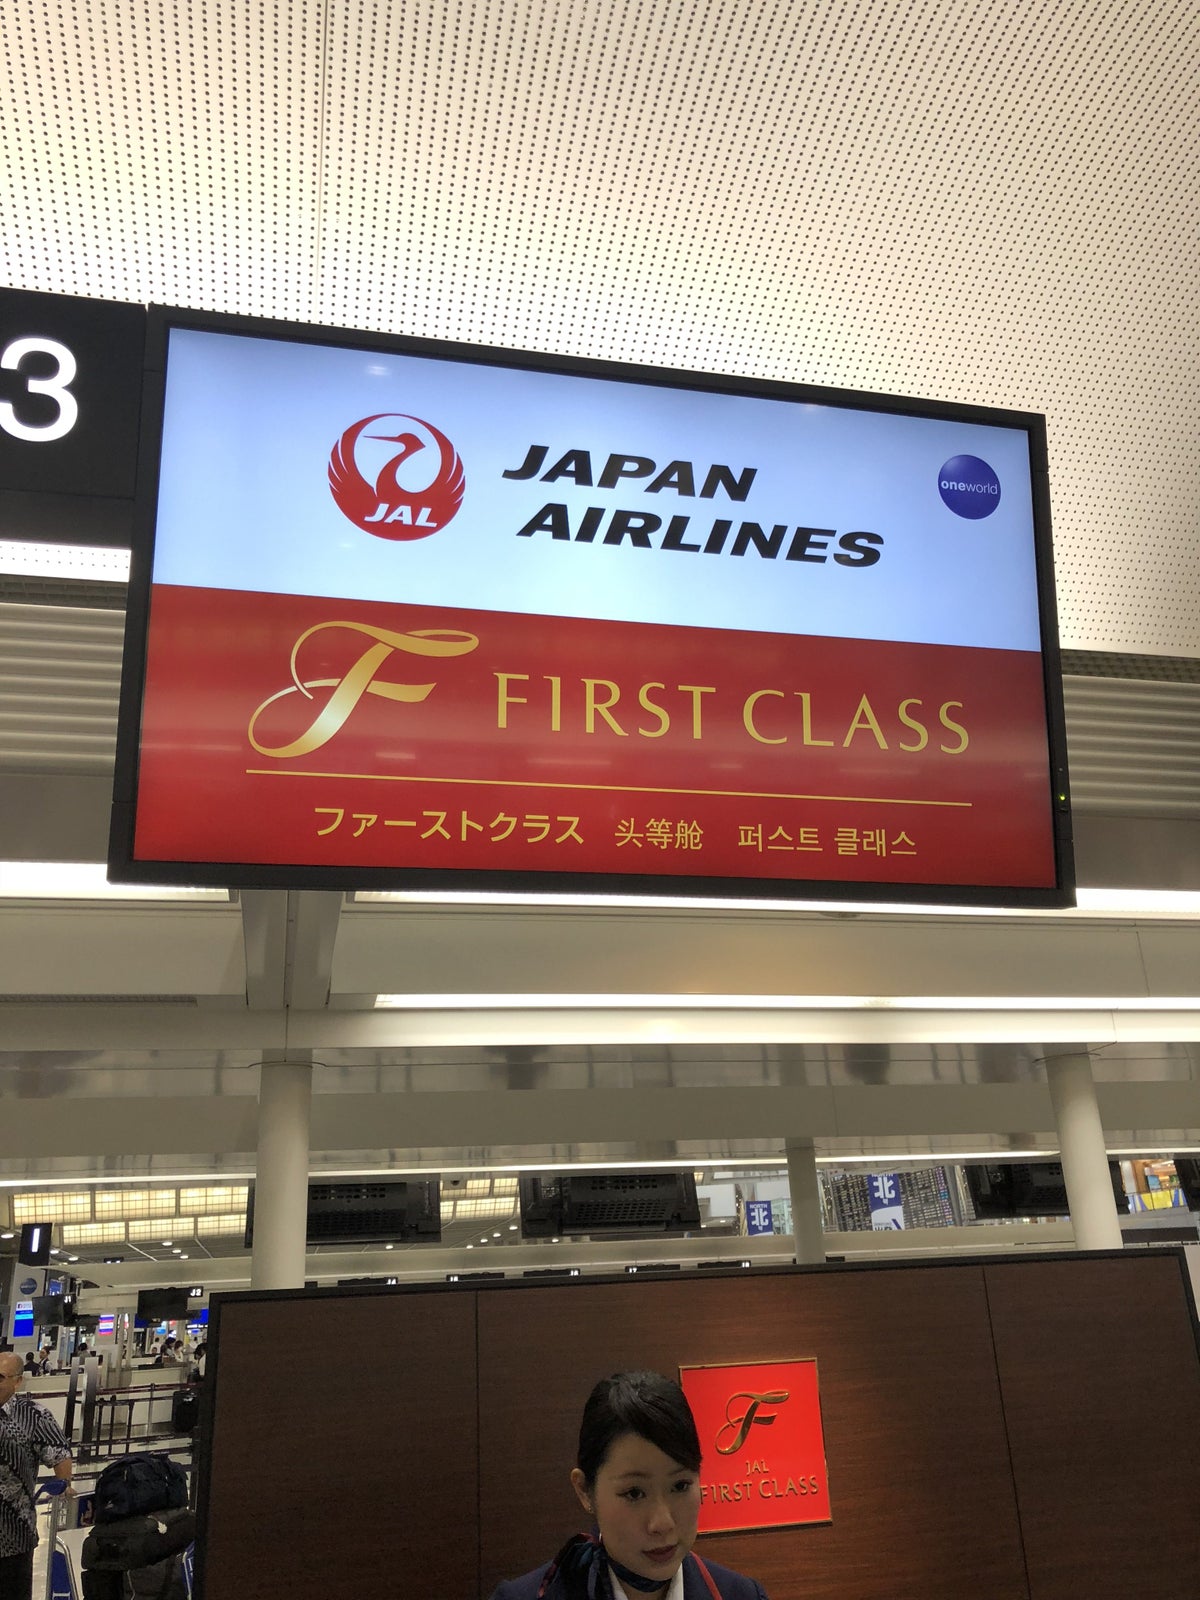 Japan Airlines 777 First Class Check-In Counter